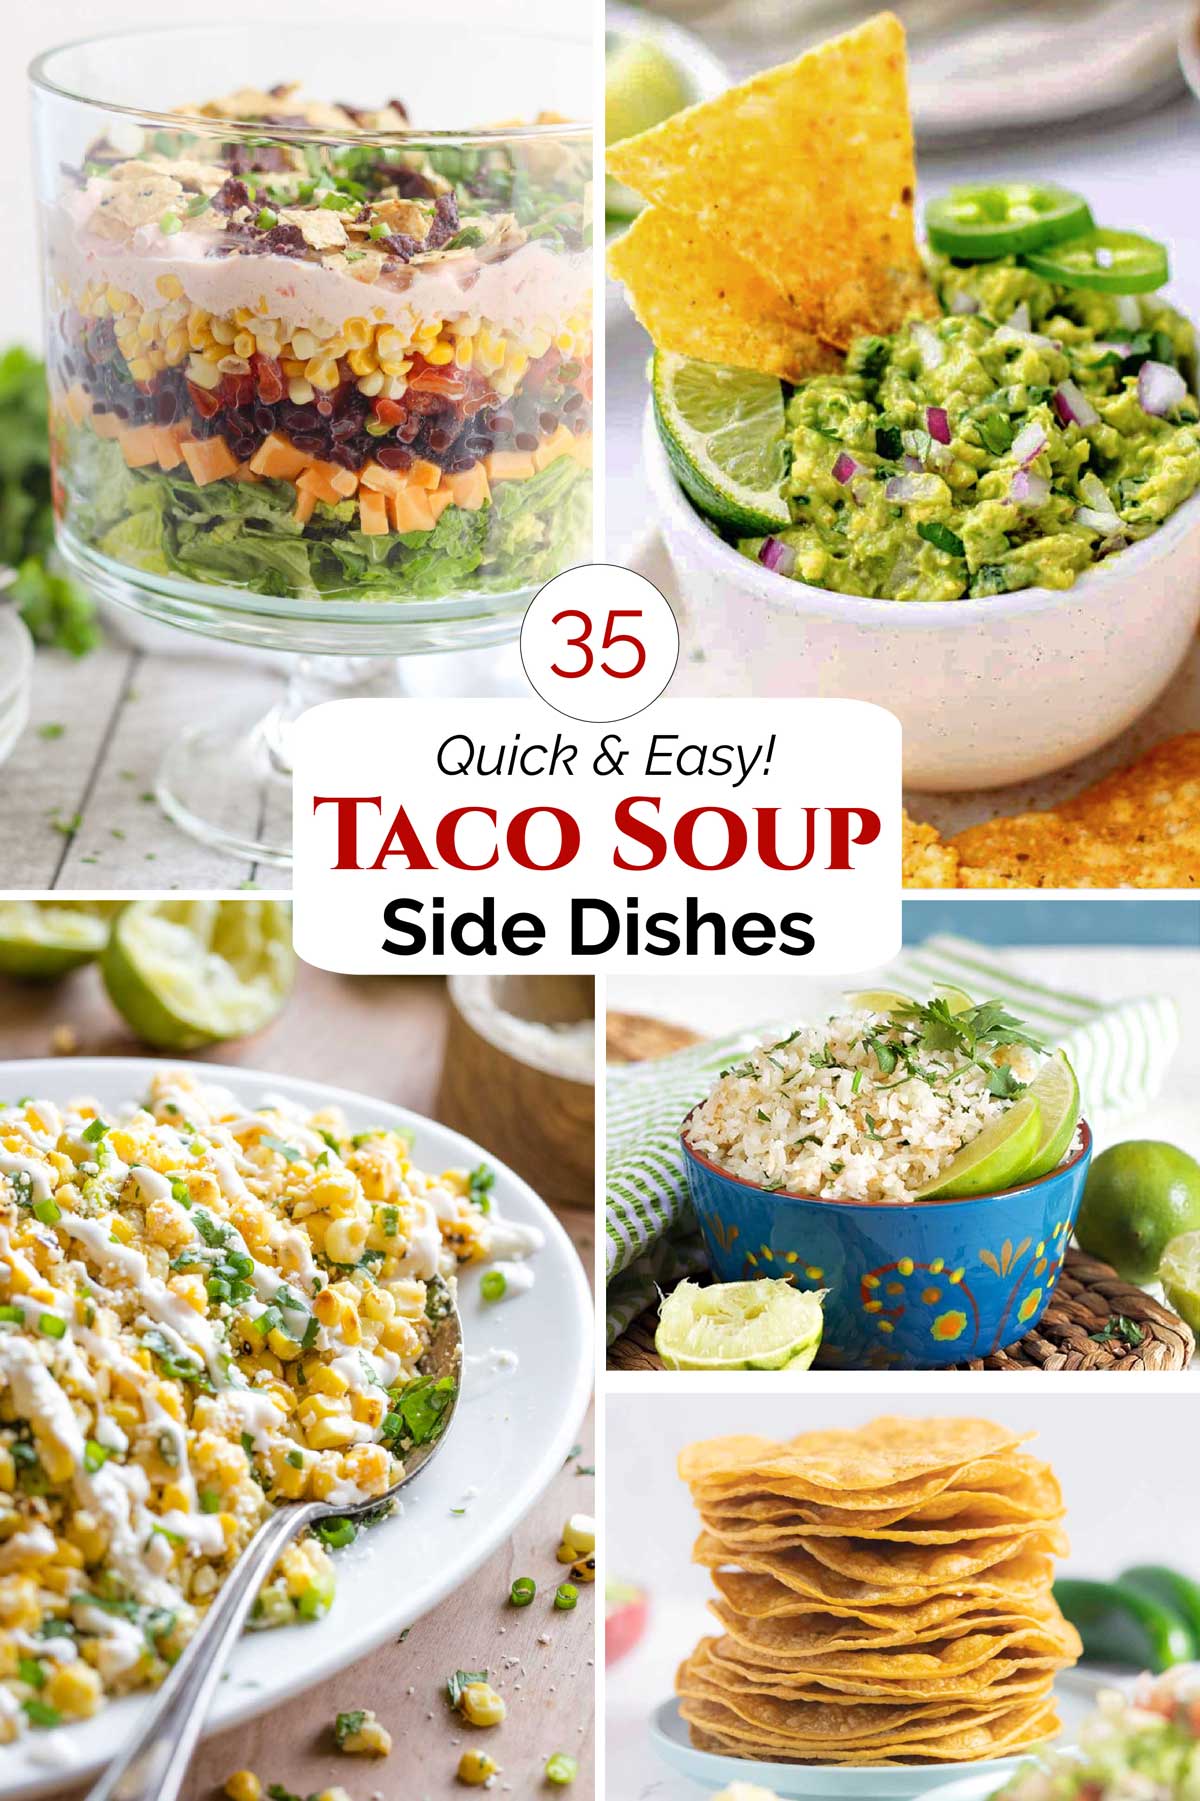 Collage of five recipe photos with text reading "35 Quick and Easy! Taco Soup Side Dishes".